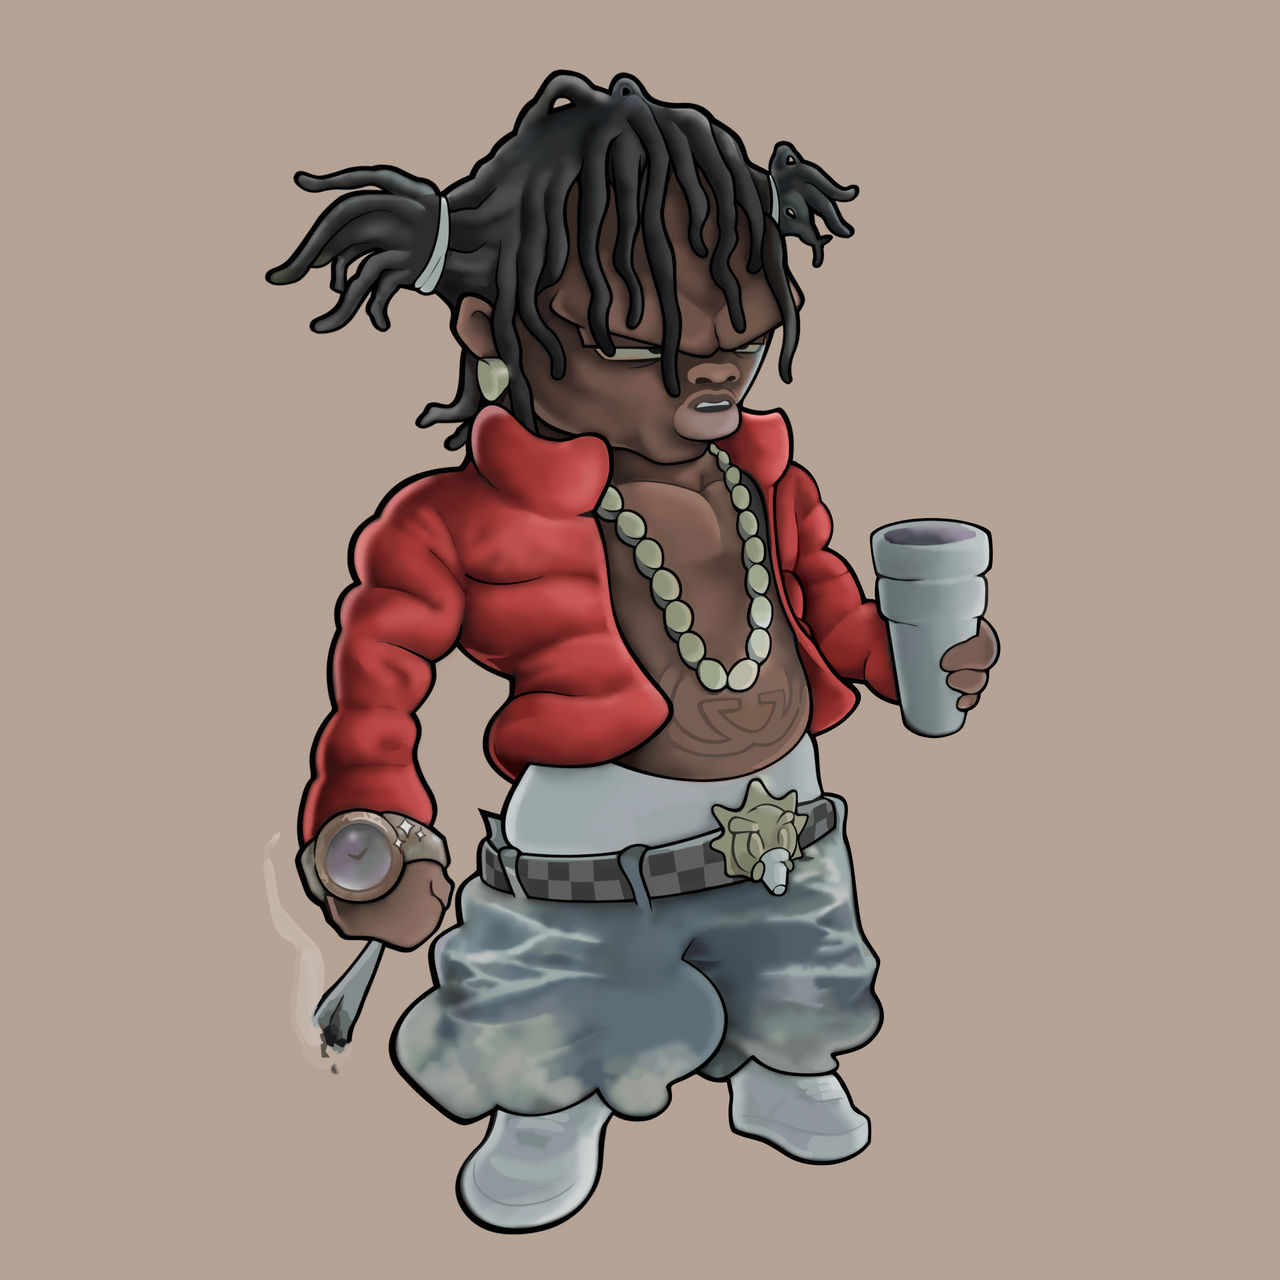 Chief Keef - Glo Gang by VinaoCasarim on DeviantArt